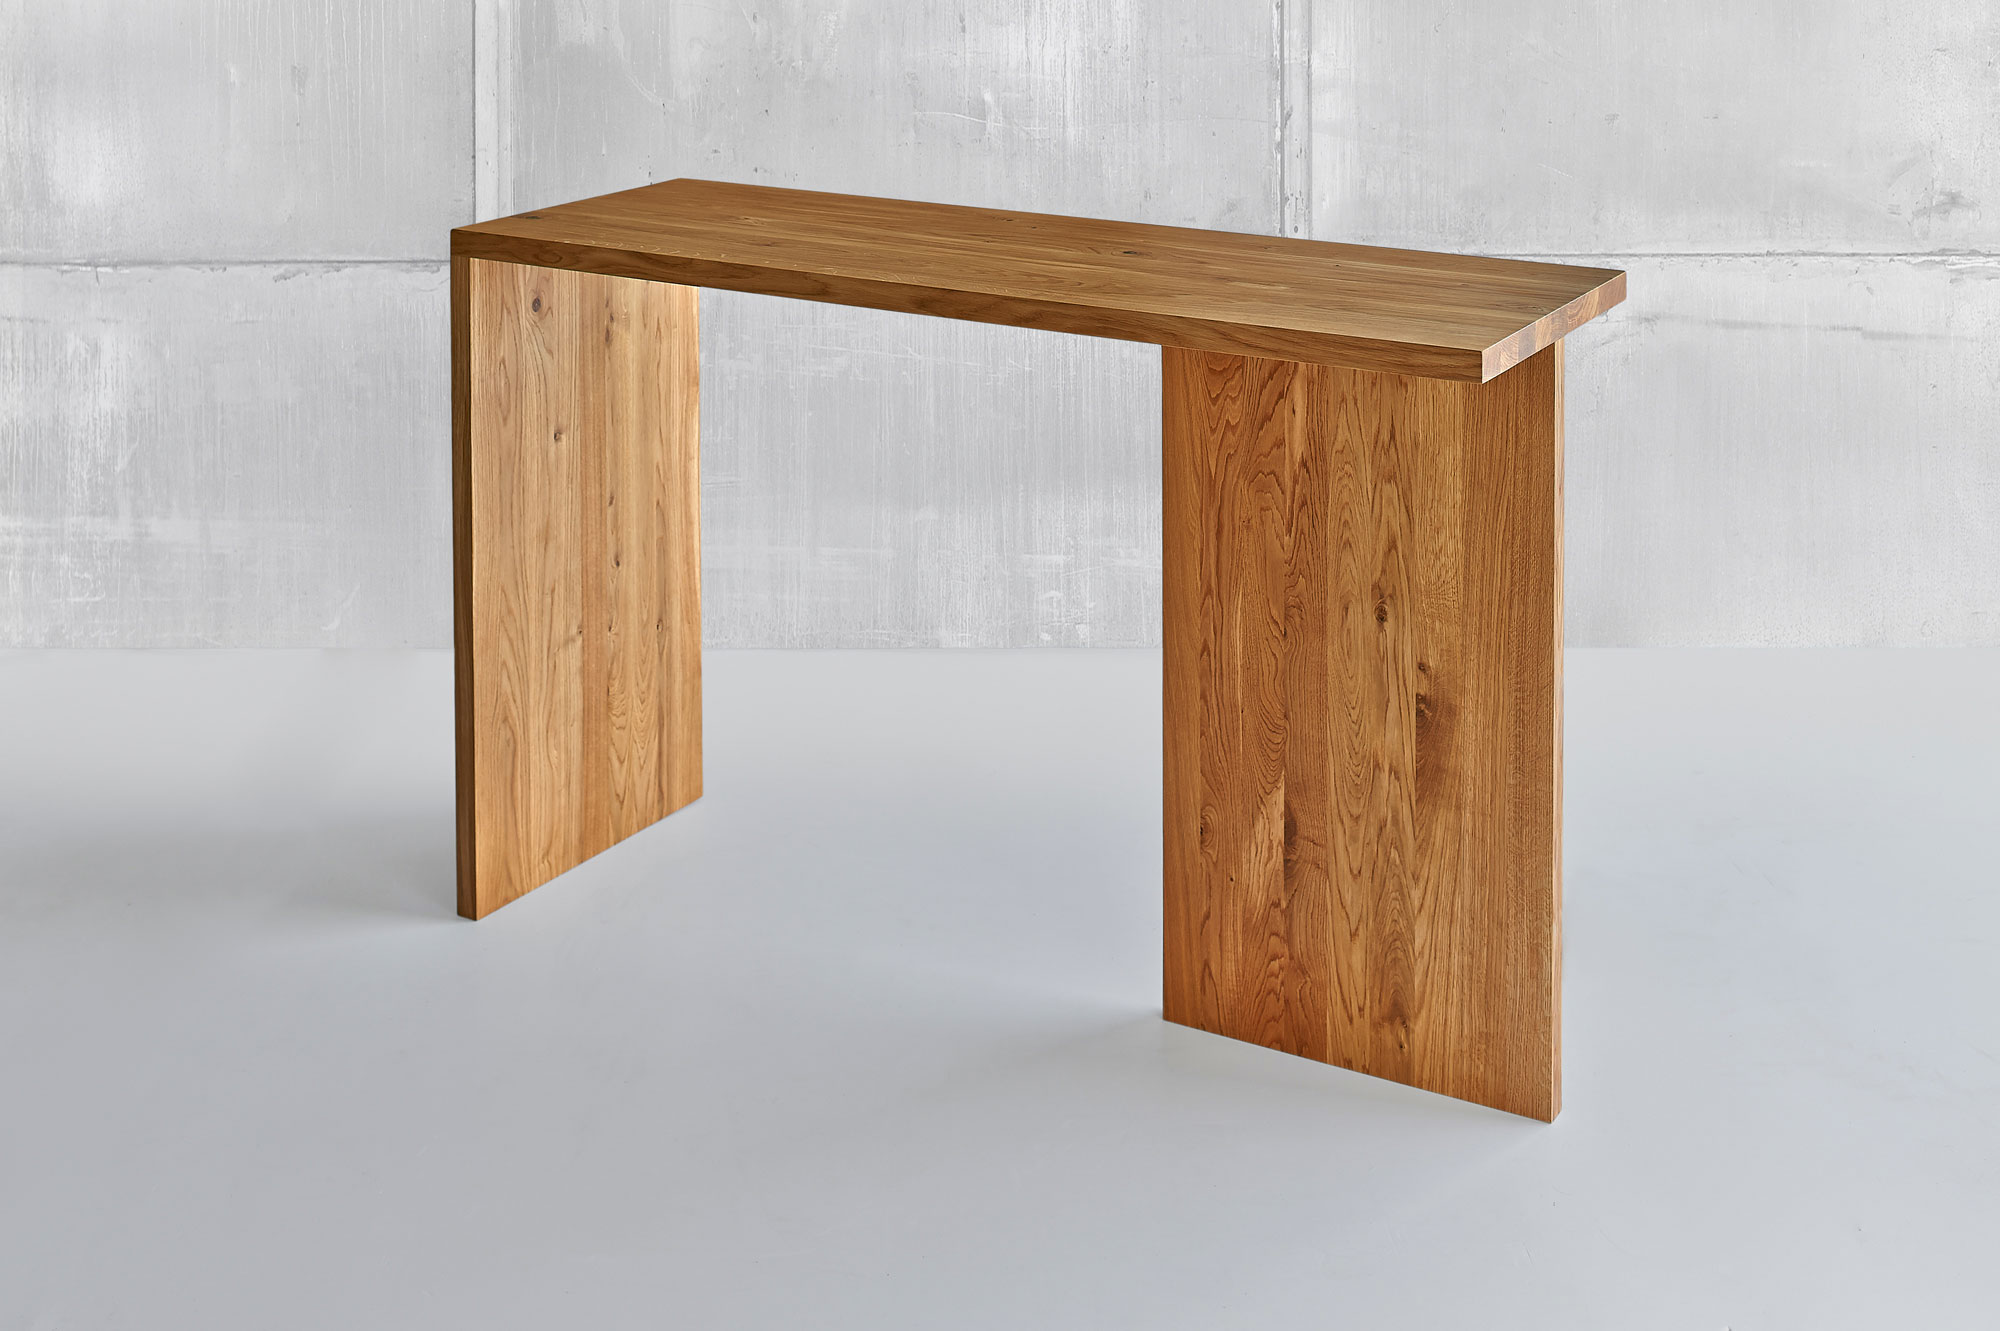 Solid Wood Console Table MENA CONSOLE 1460 custom made in solid wood by vitamin design